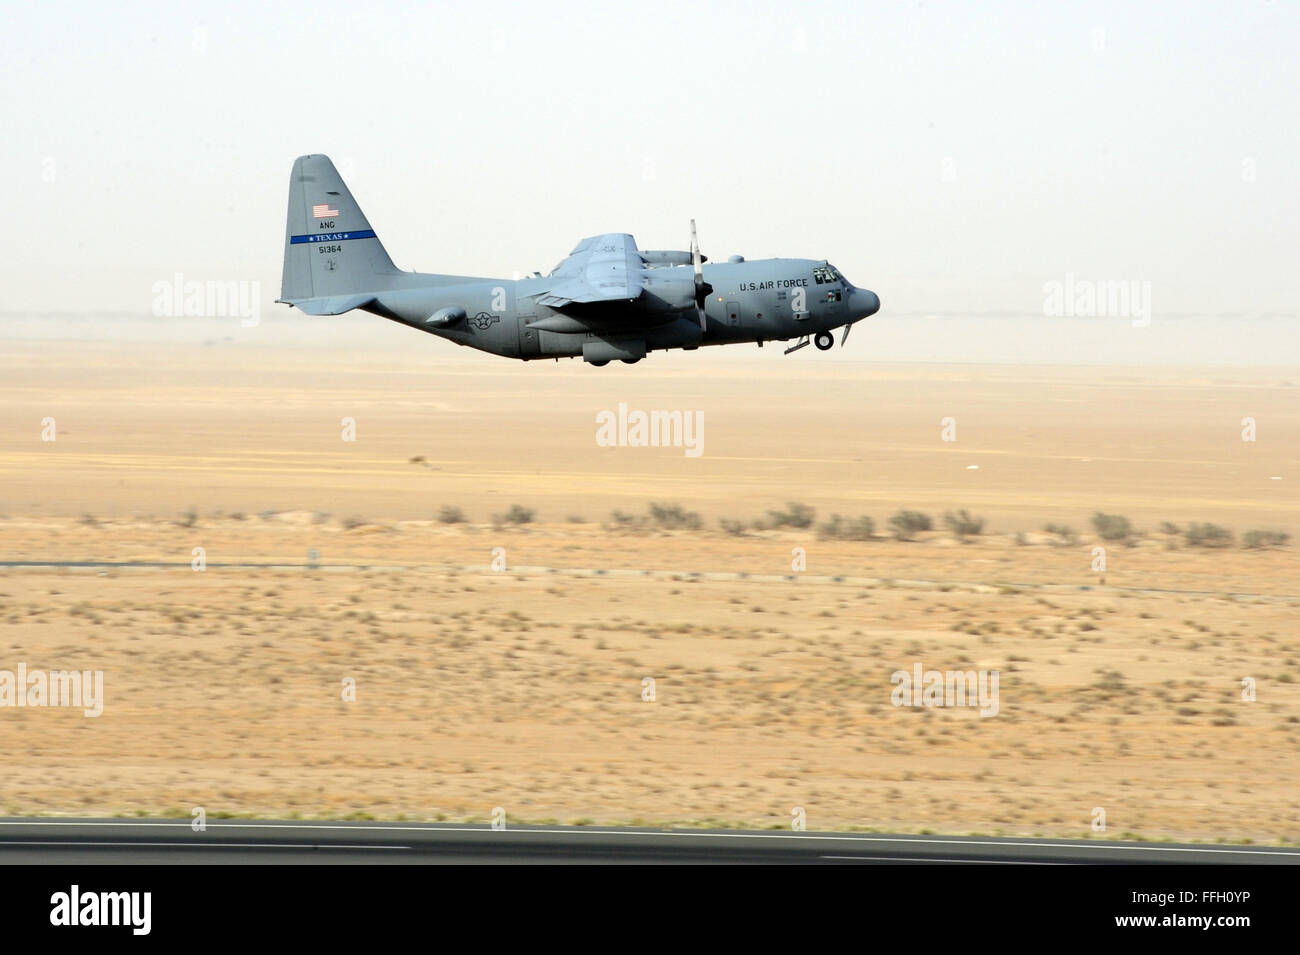 An Air Mobility Command C-130 Hercules deployed from the Texas Air National Guard lifts off from in Southwest Asia. The C-130 primarily performs the tactical portion of the airlift mission. The aircraft is capable of operating from rough, dirt strips and is the prime transport for airdropping troops and equipment into hostile areas. Stock Photo